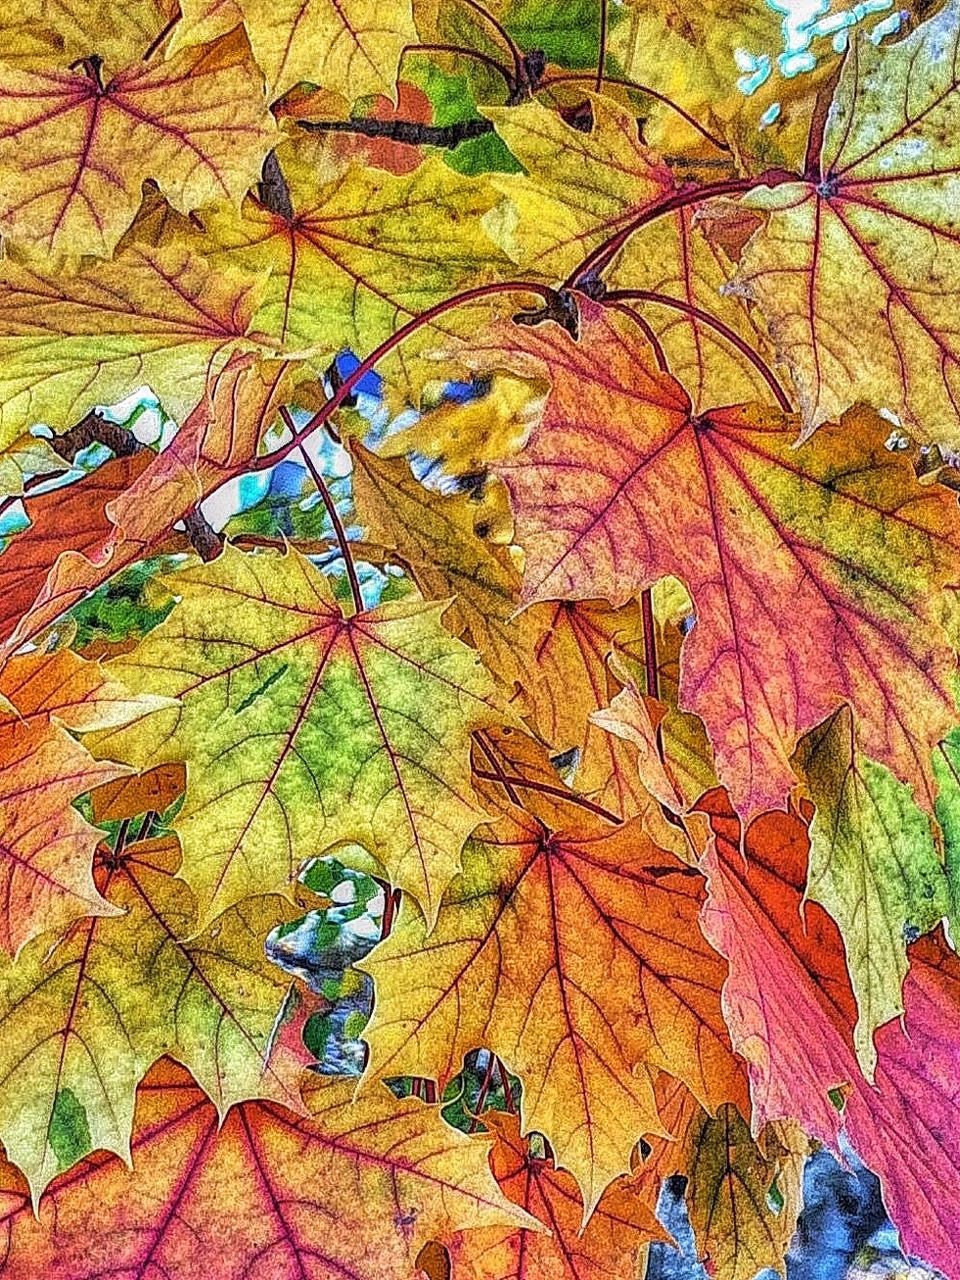 leaf, autumn, change, tree, branch, leaves, season, nature, leaf vein, tranquility, growth, beauty in nature, multi colored, day, close-up, green color, maple leaf, outdoors, no people, natural pattern